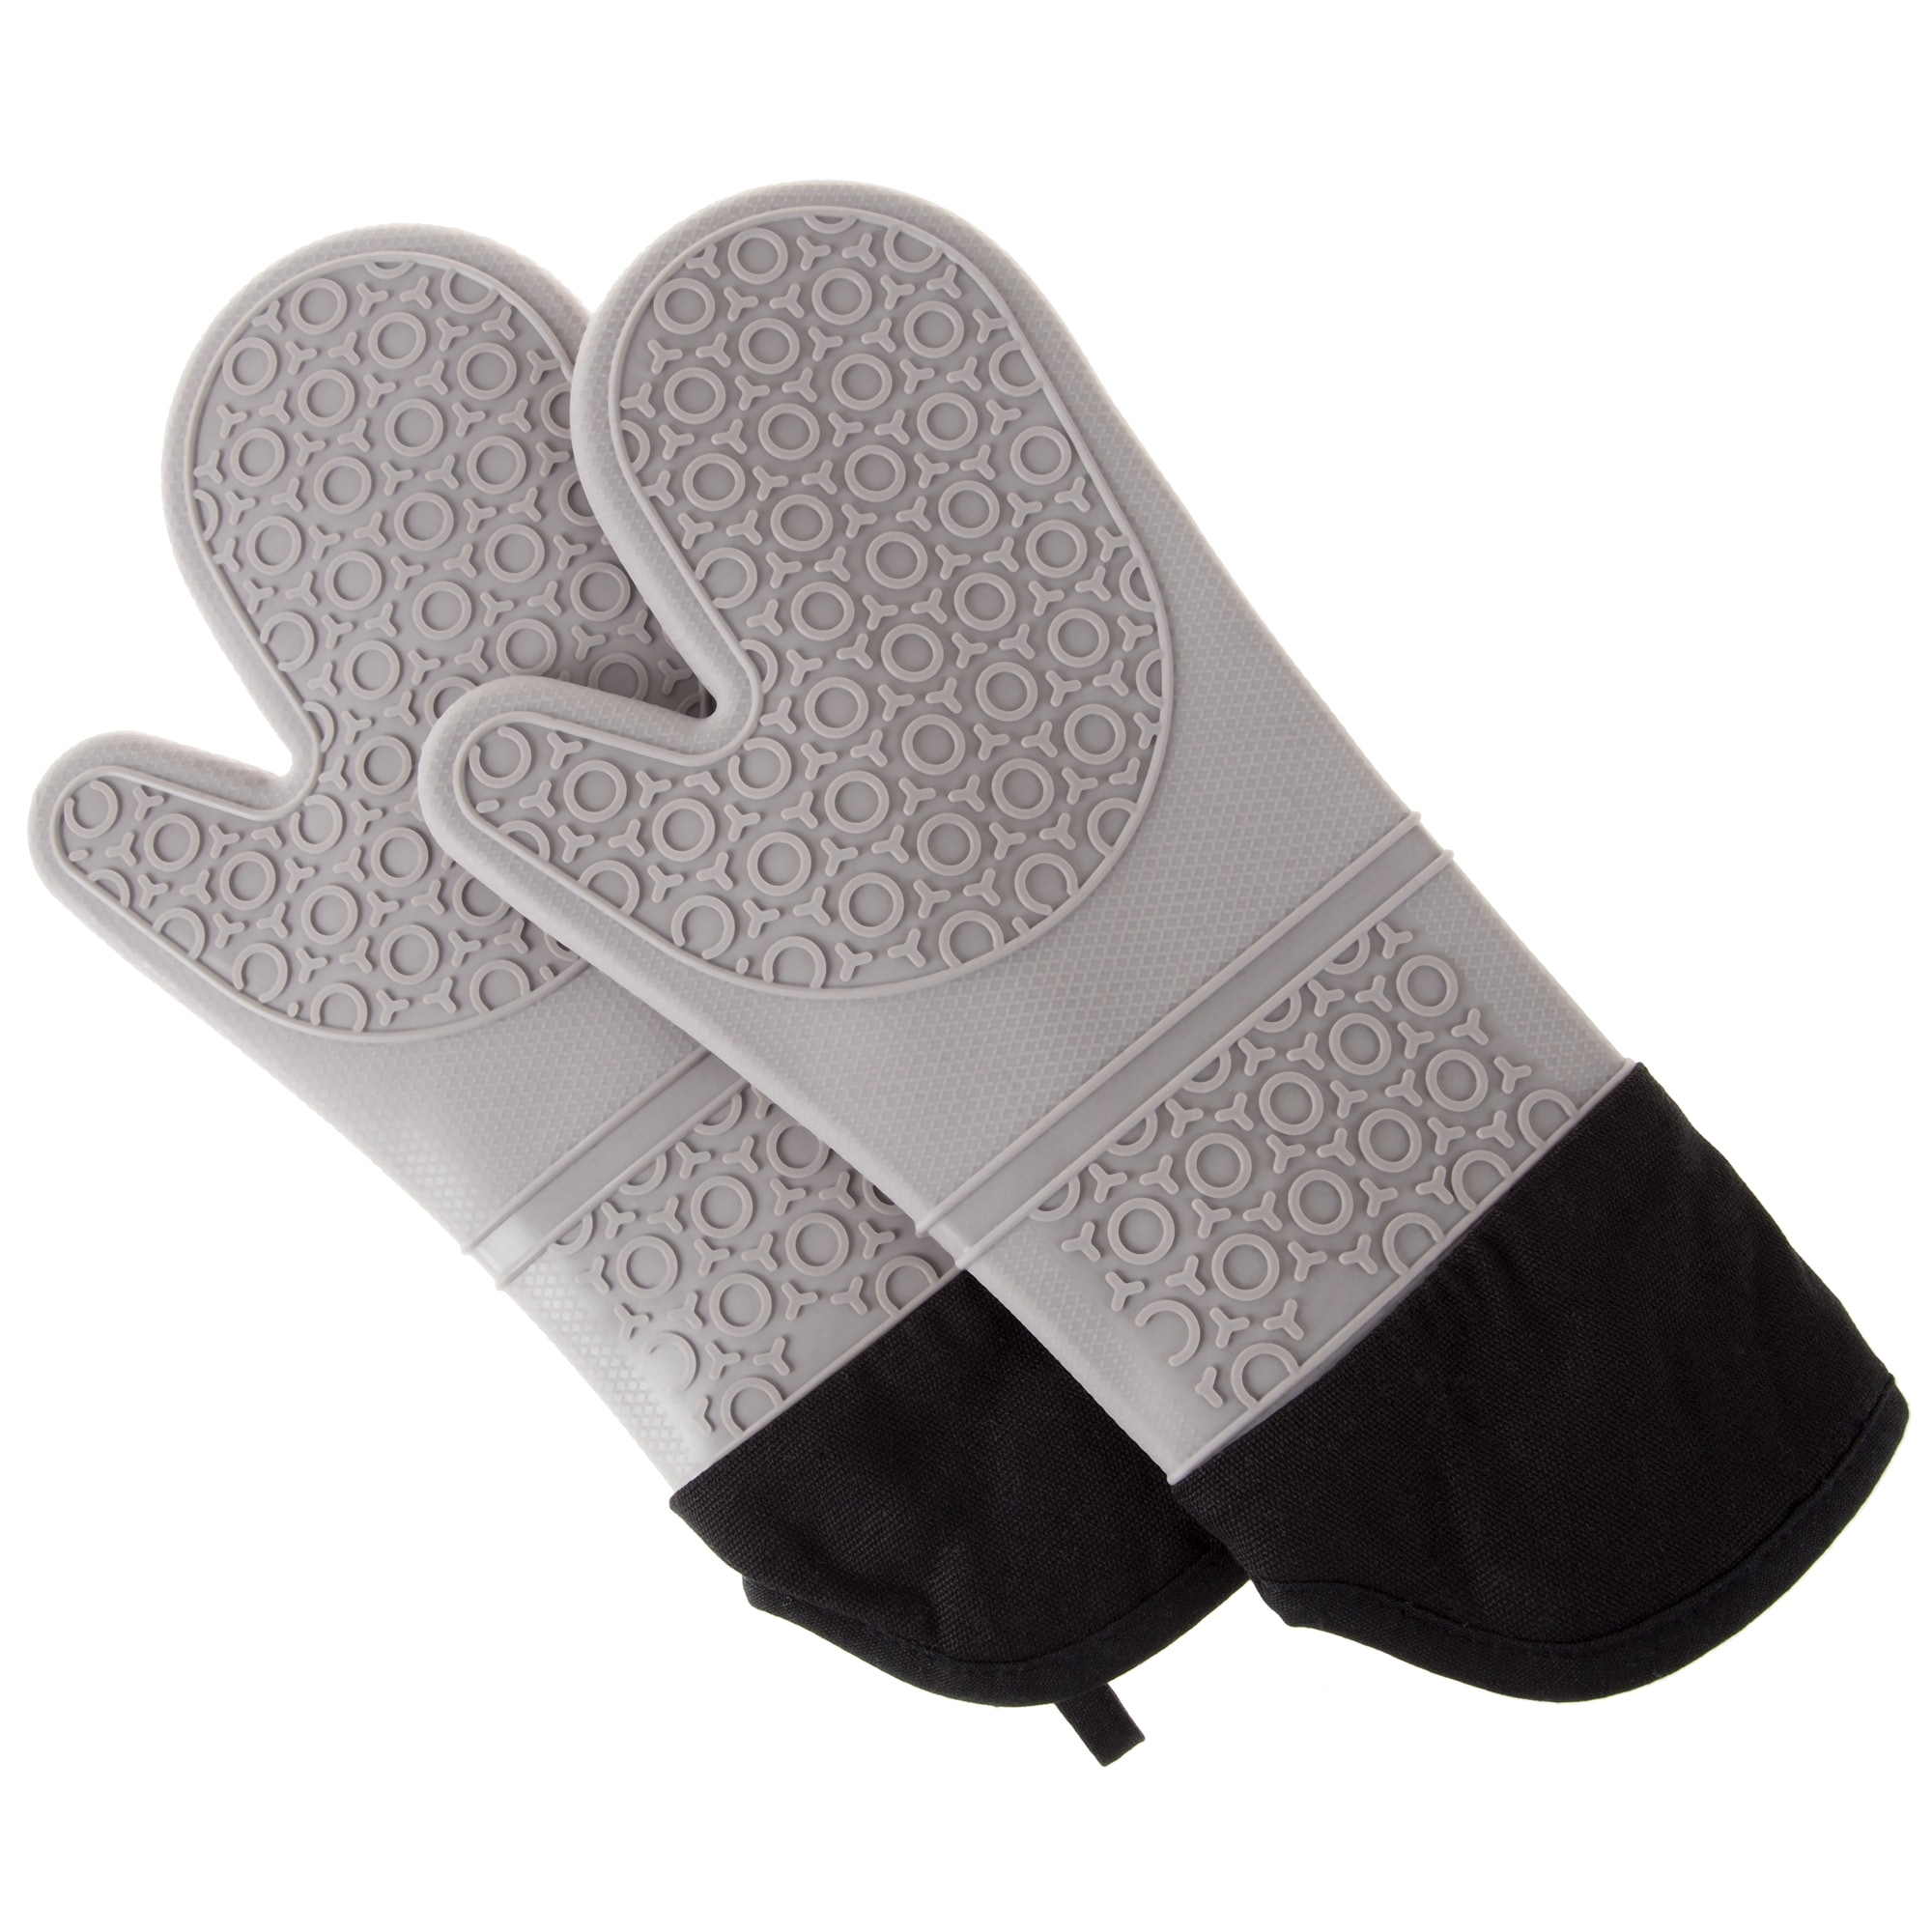 Flower Design- Heat Resistant Silicone Oven Mitts, Soft Quilted lining, Extra Long, Waterproof Flexible Gloves for Cooking